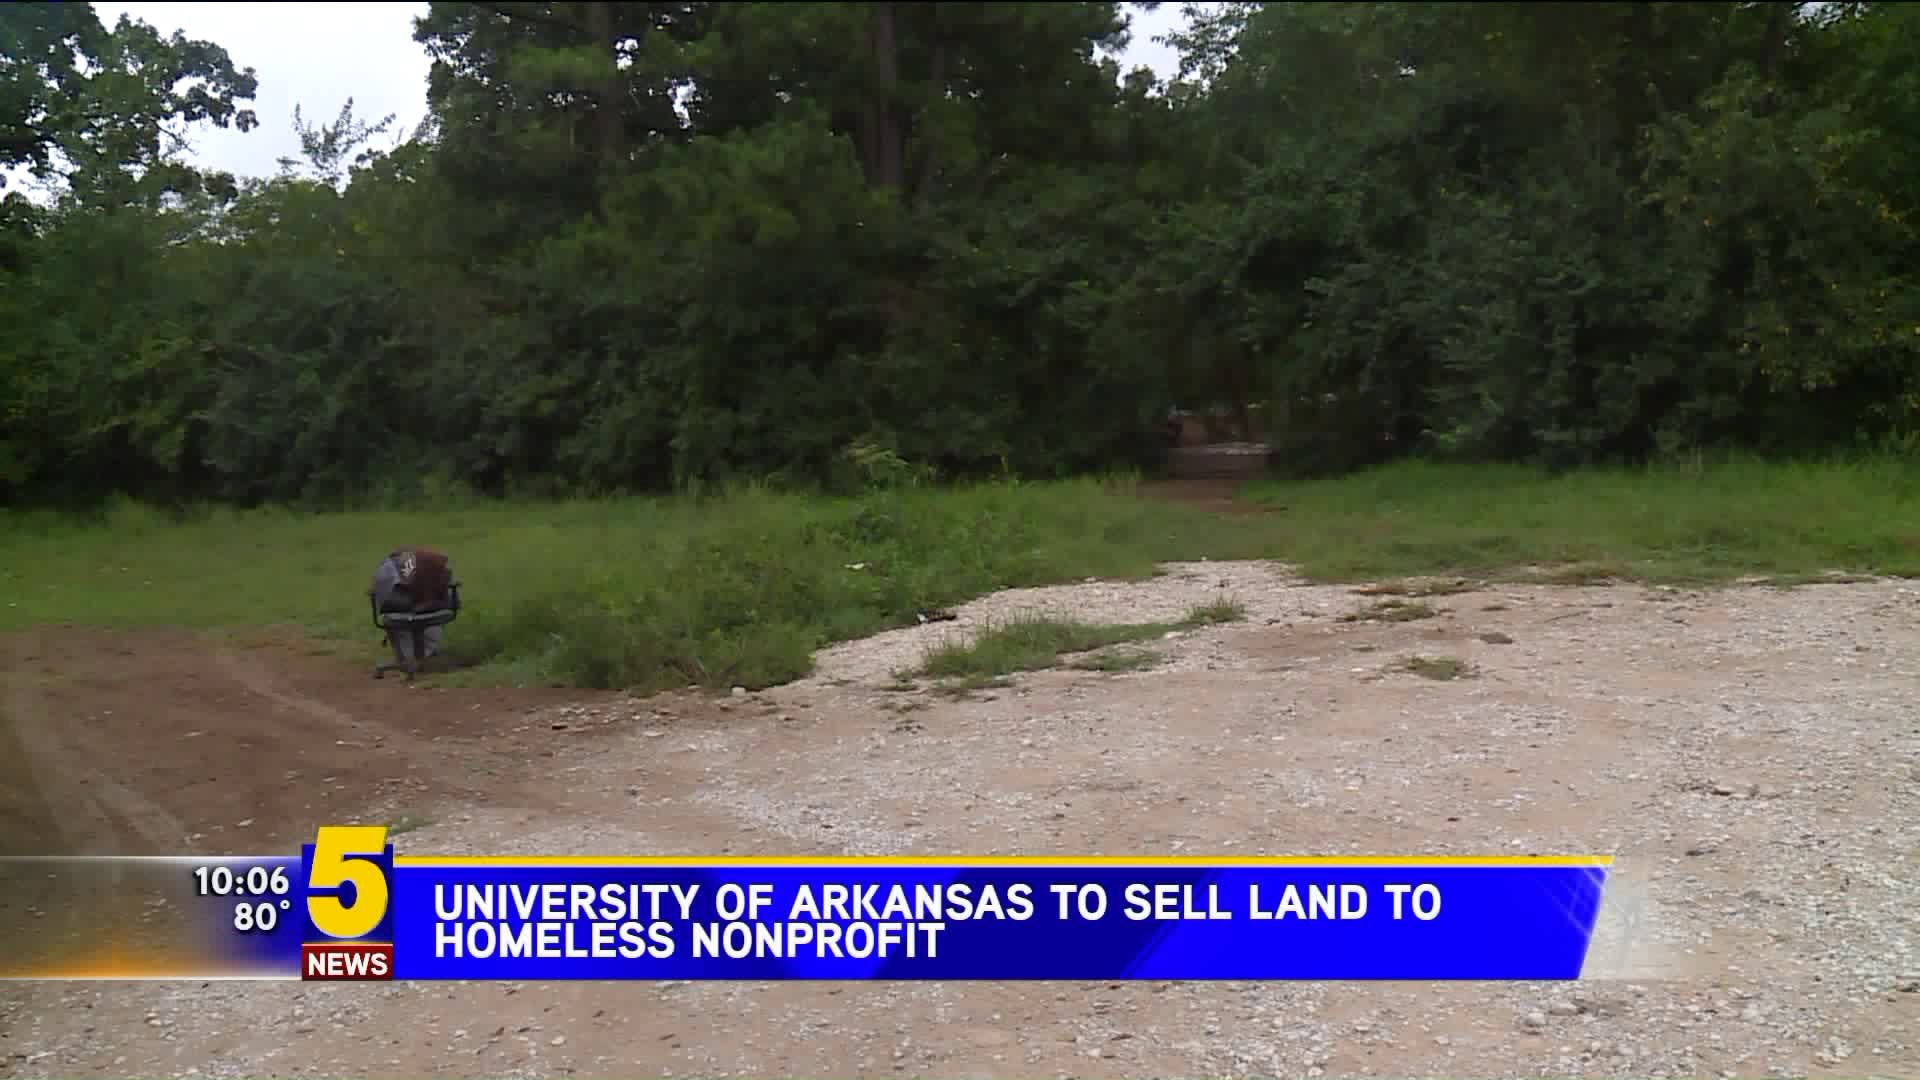 UA To Sell Land To Homeles Nonprofit